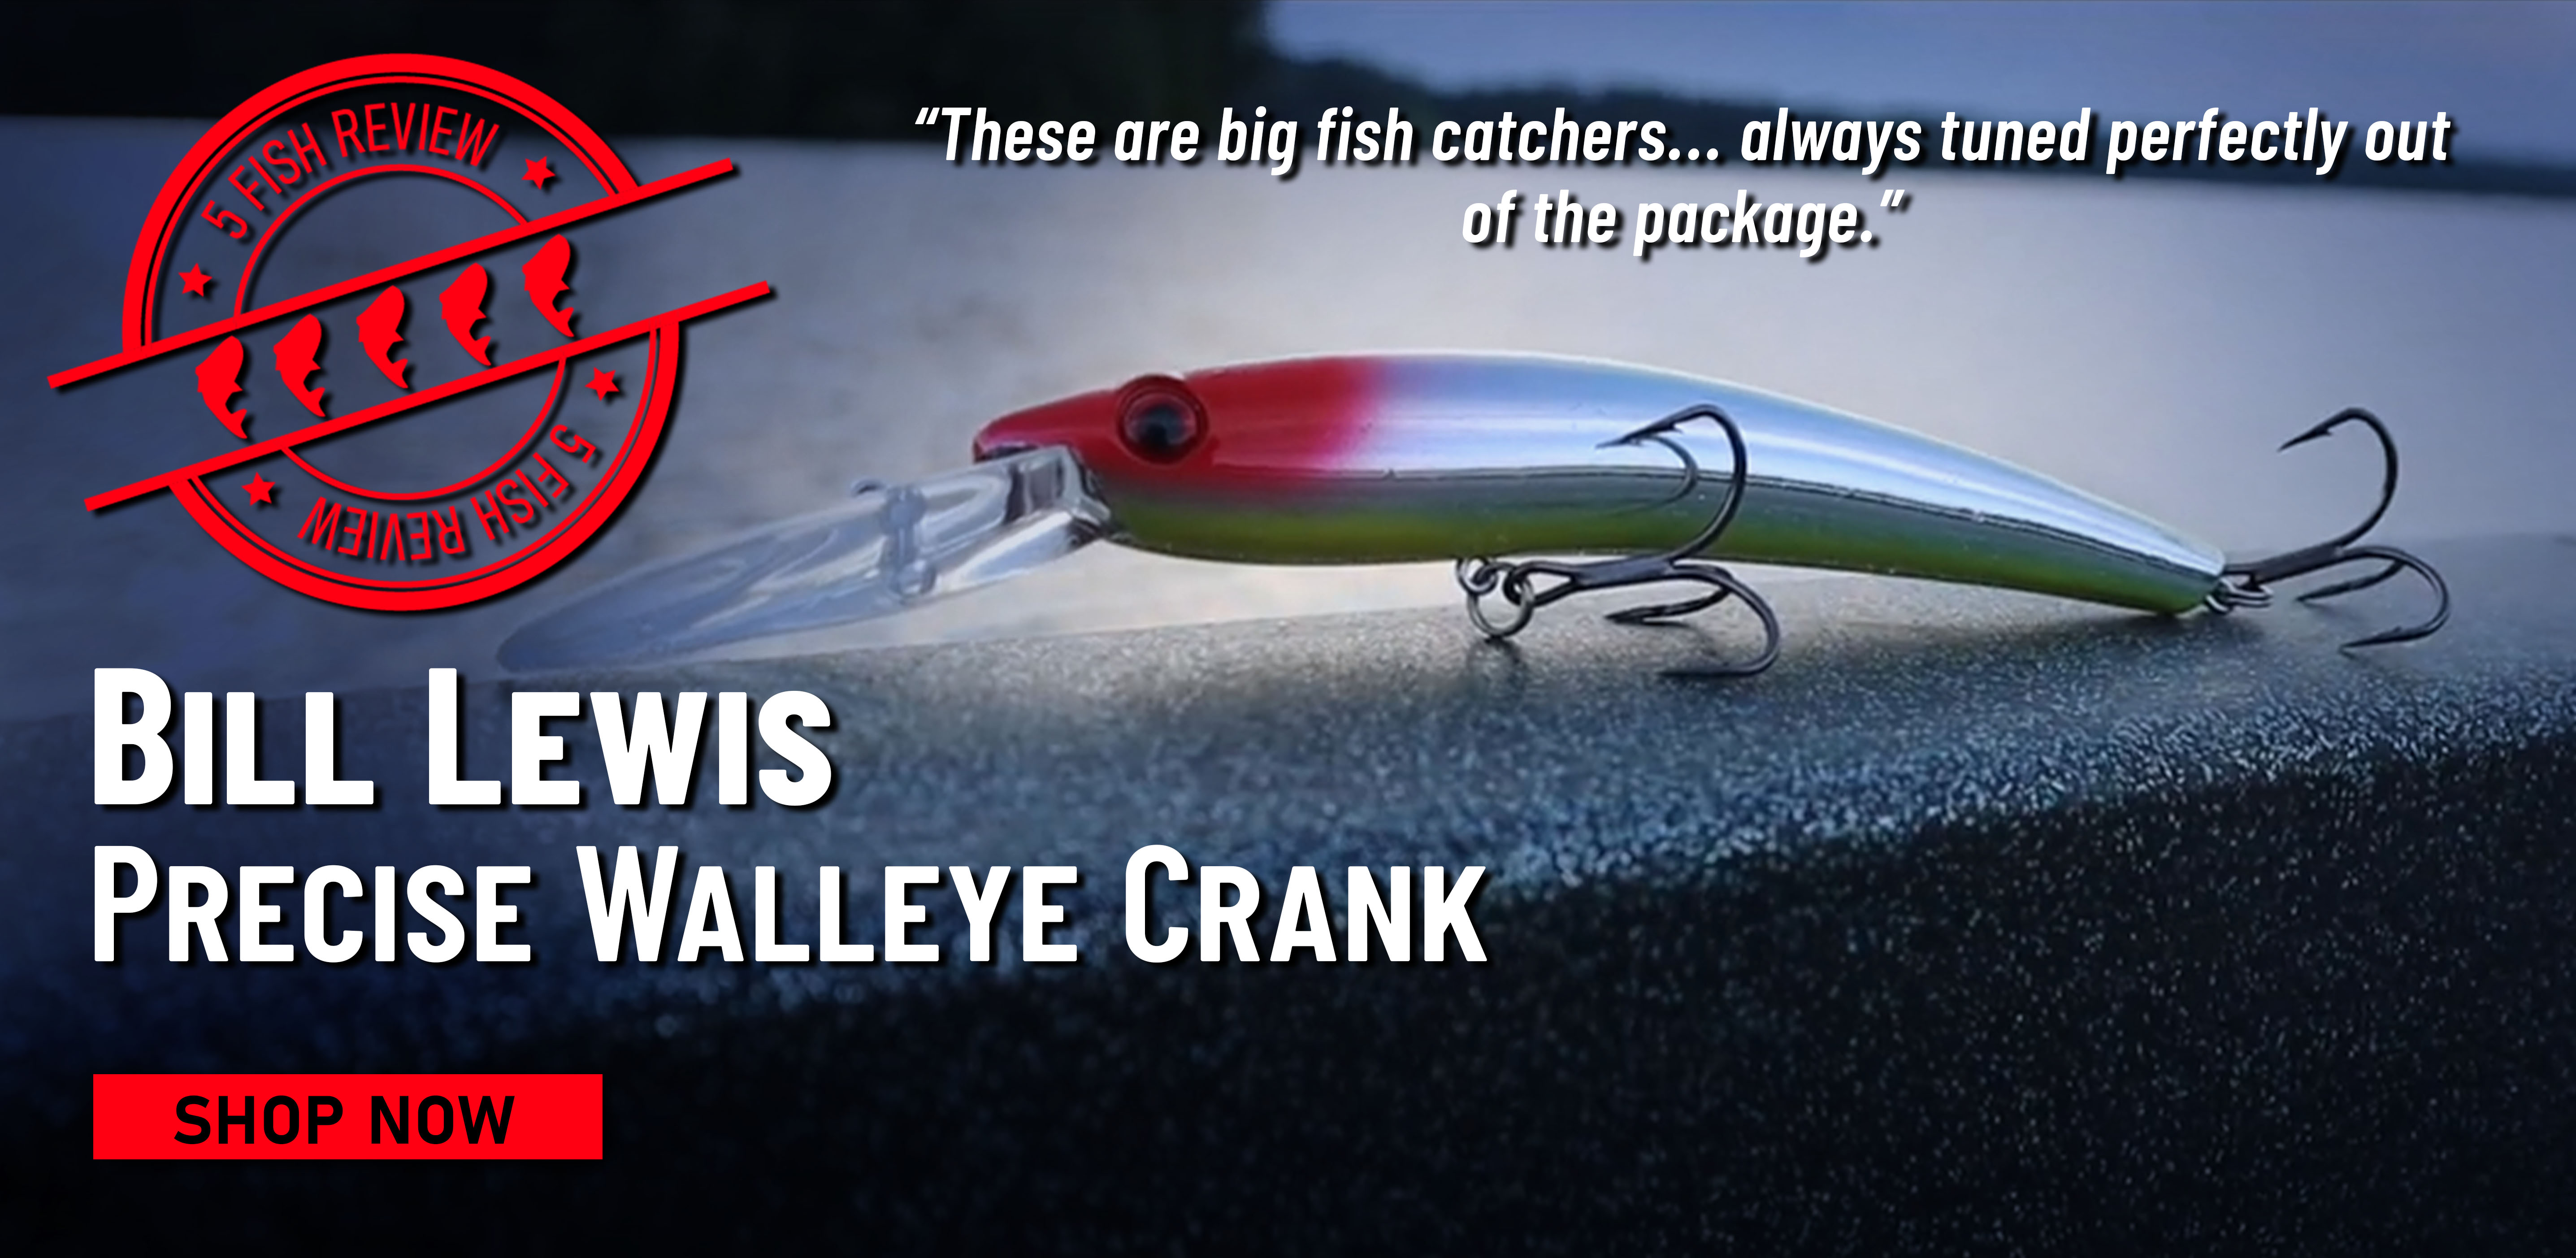 15% Off Our Entire Walleye Category, Time to Stock Up! - Fish USA